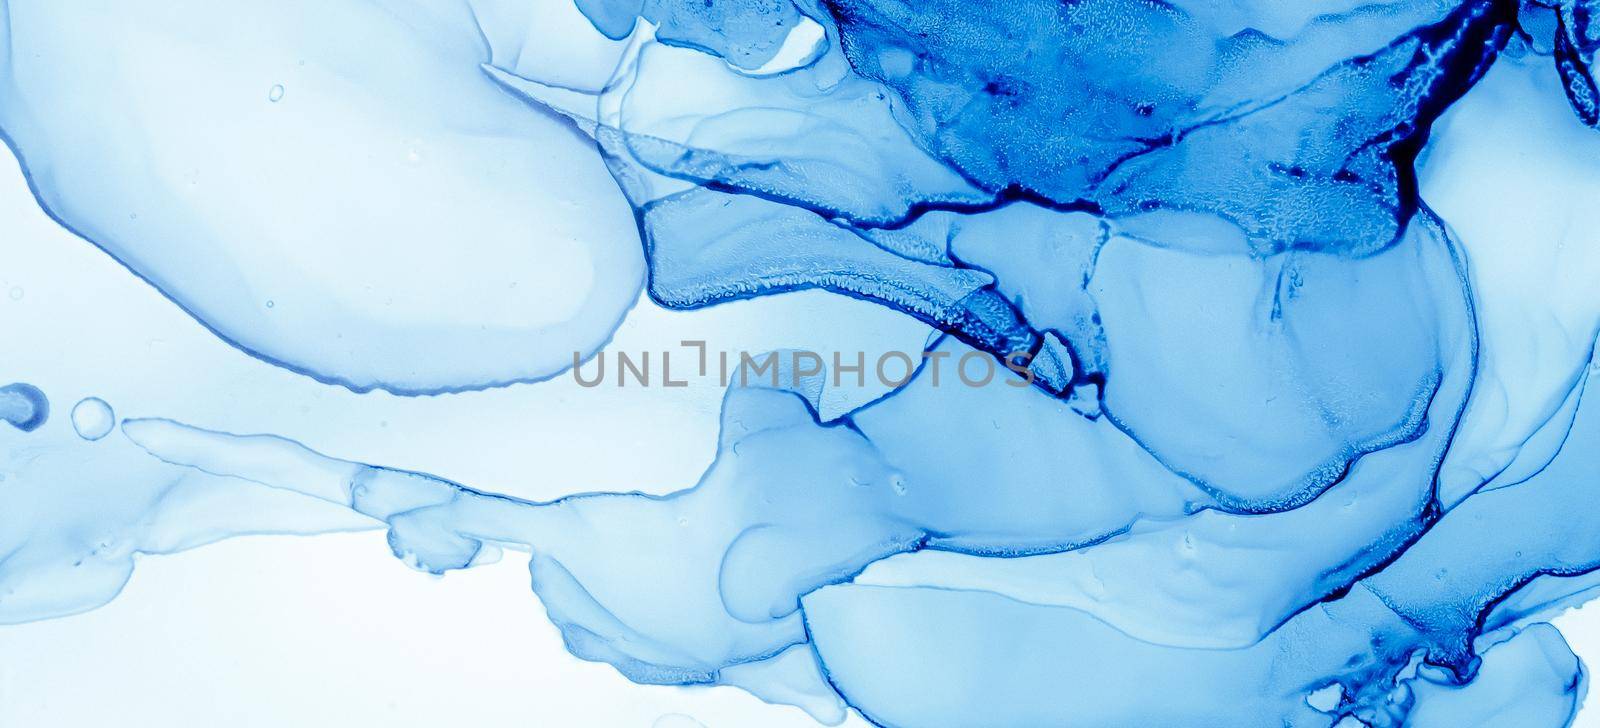 Ink Colours Mix Water. Art Flow Illustration. Indigo Marble Print. Ink Colours Mix. Snow Light Effect. Blue Fluid Pattern. Oil Liquid Texture. Watercolour Acrylic Wall. Alcohol Mixing Inks.